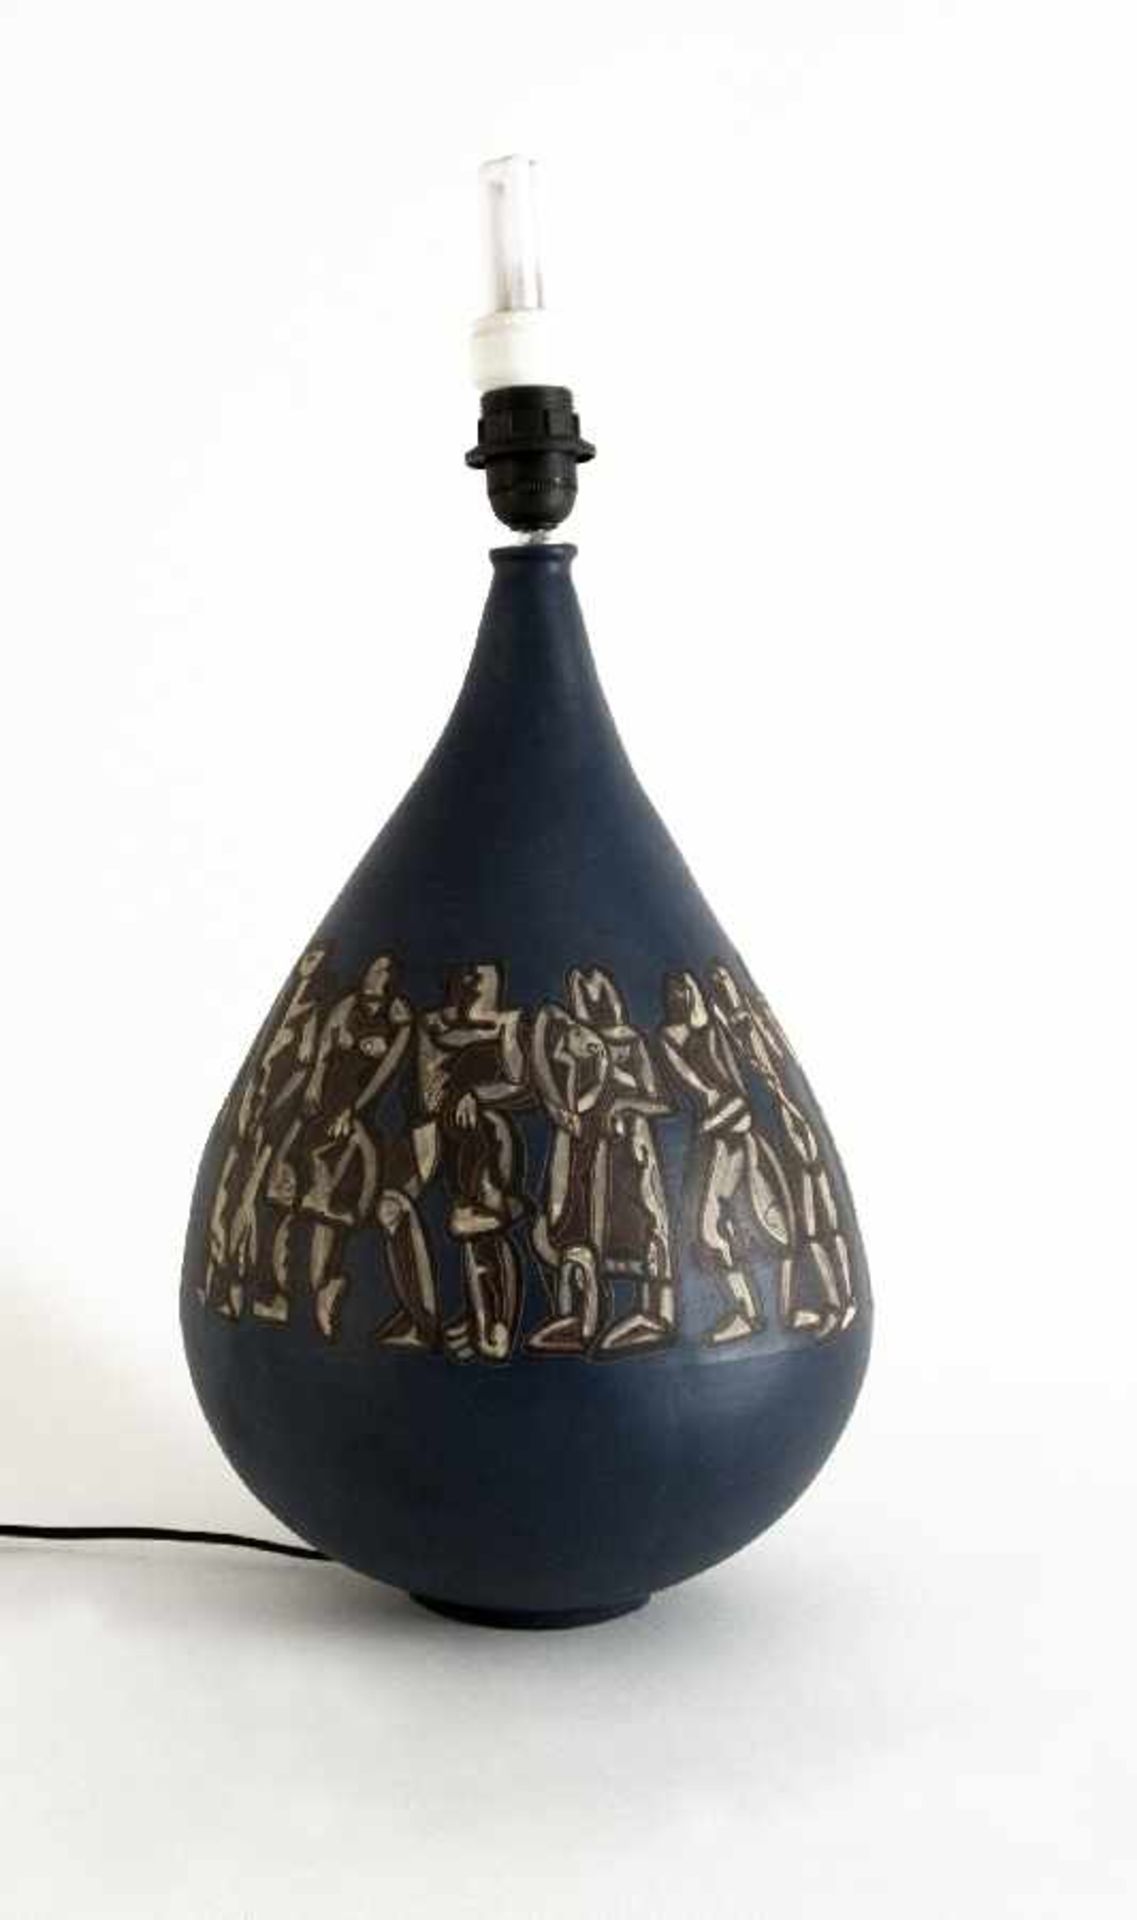 Can KinotoVase with figurative decorative frieze as a lamp baseCeramics (red body), glazed in